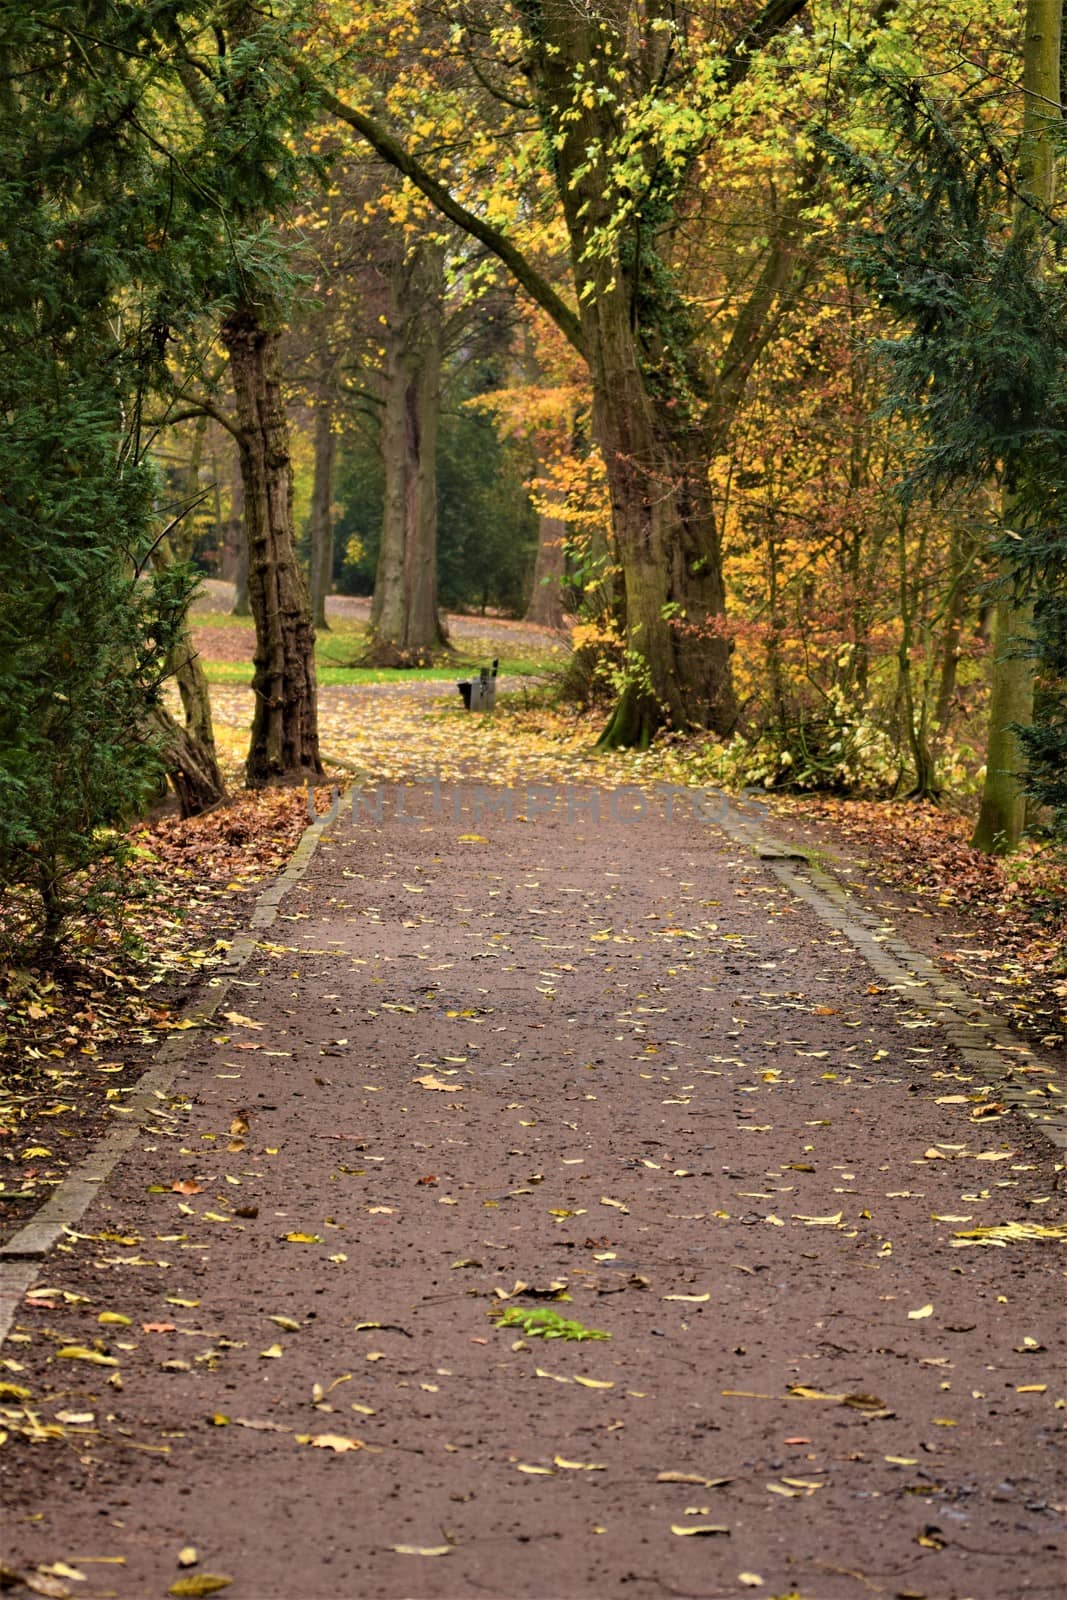 Path in the park surrounded by trees in autumn by Luise123